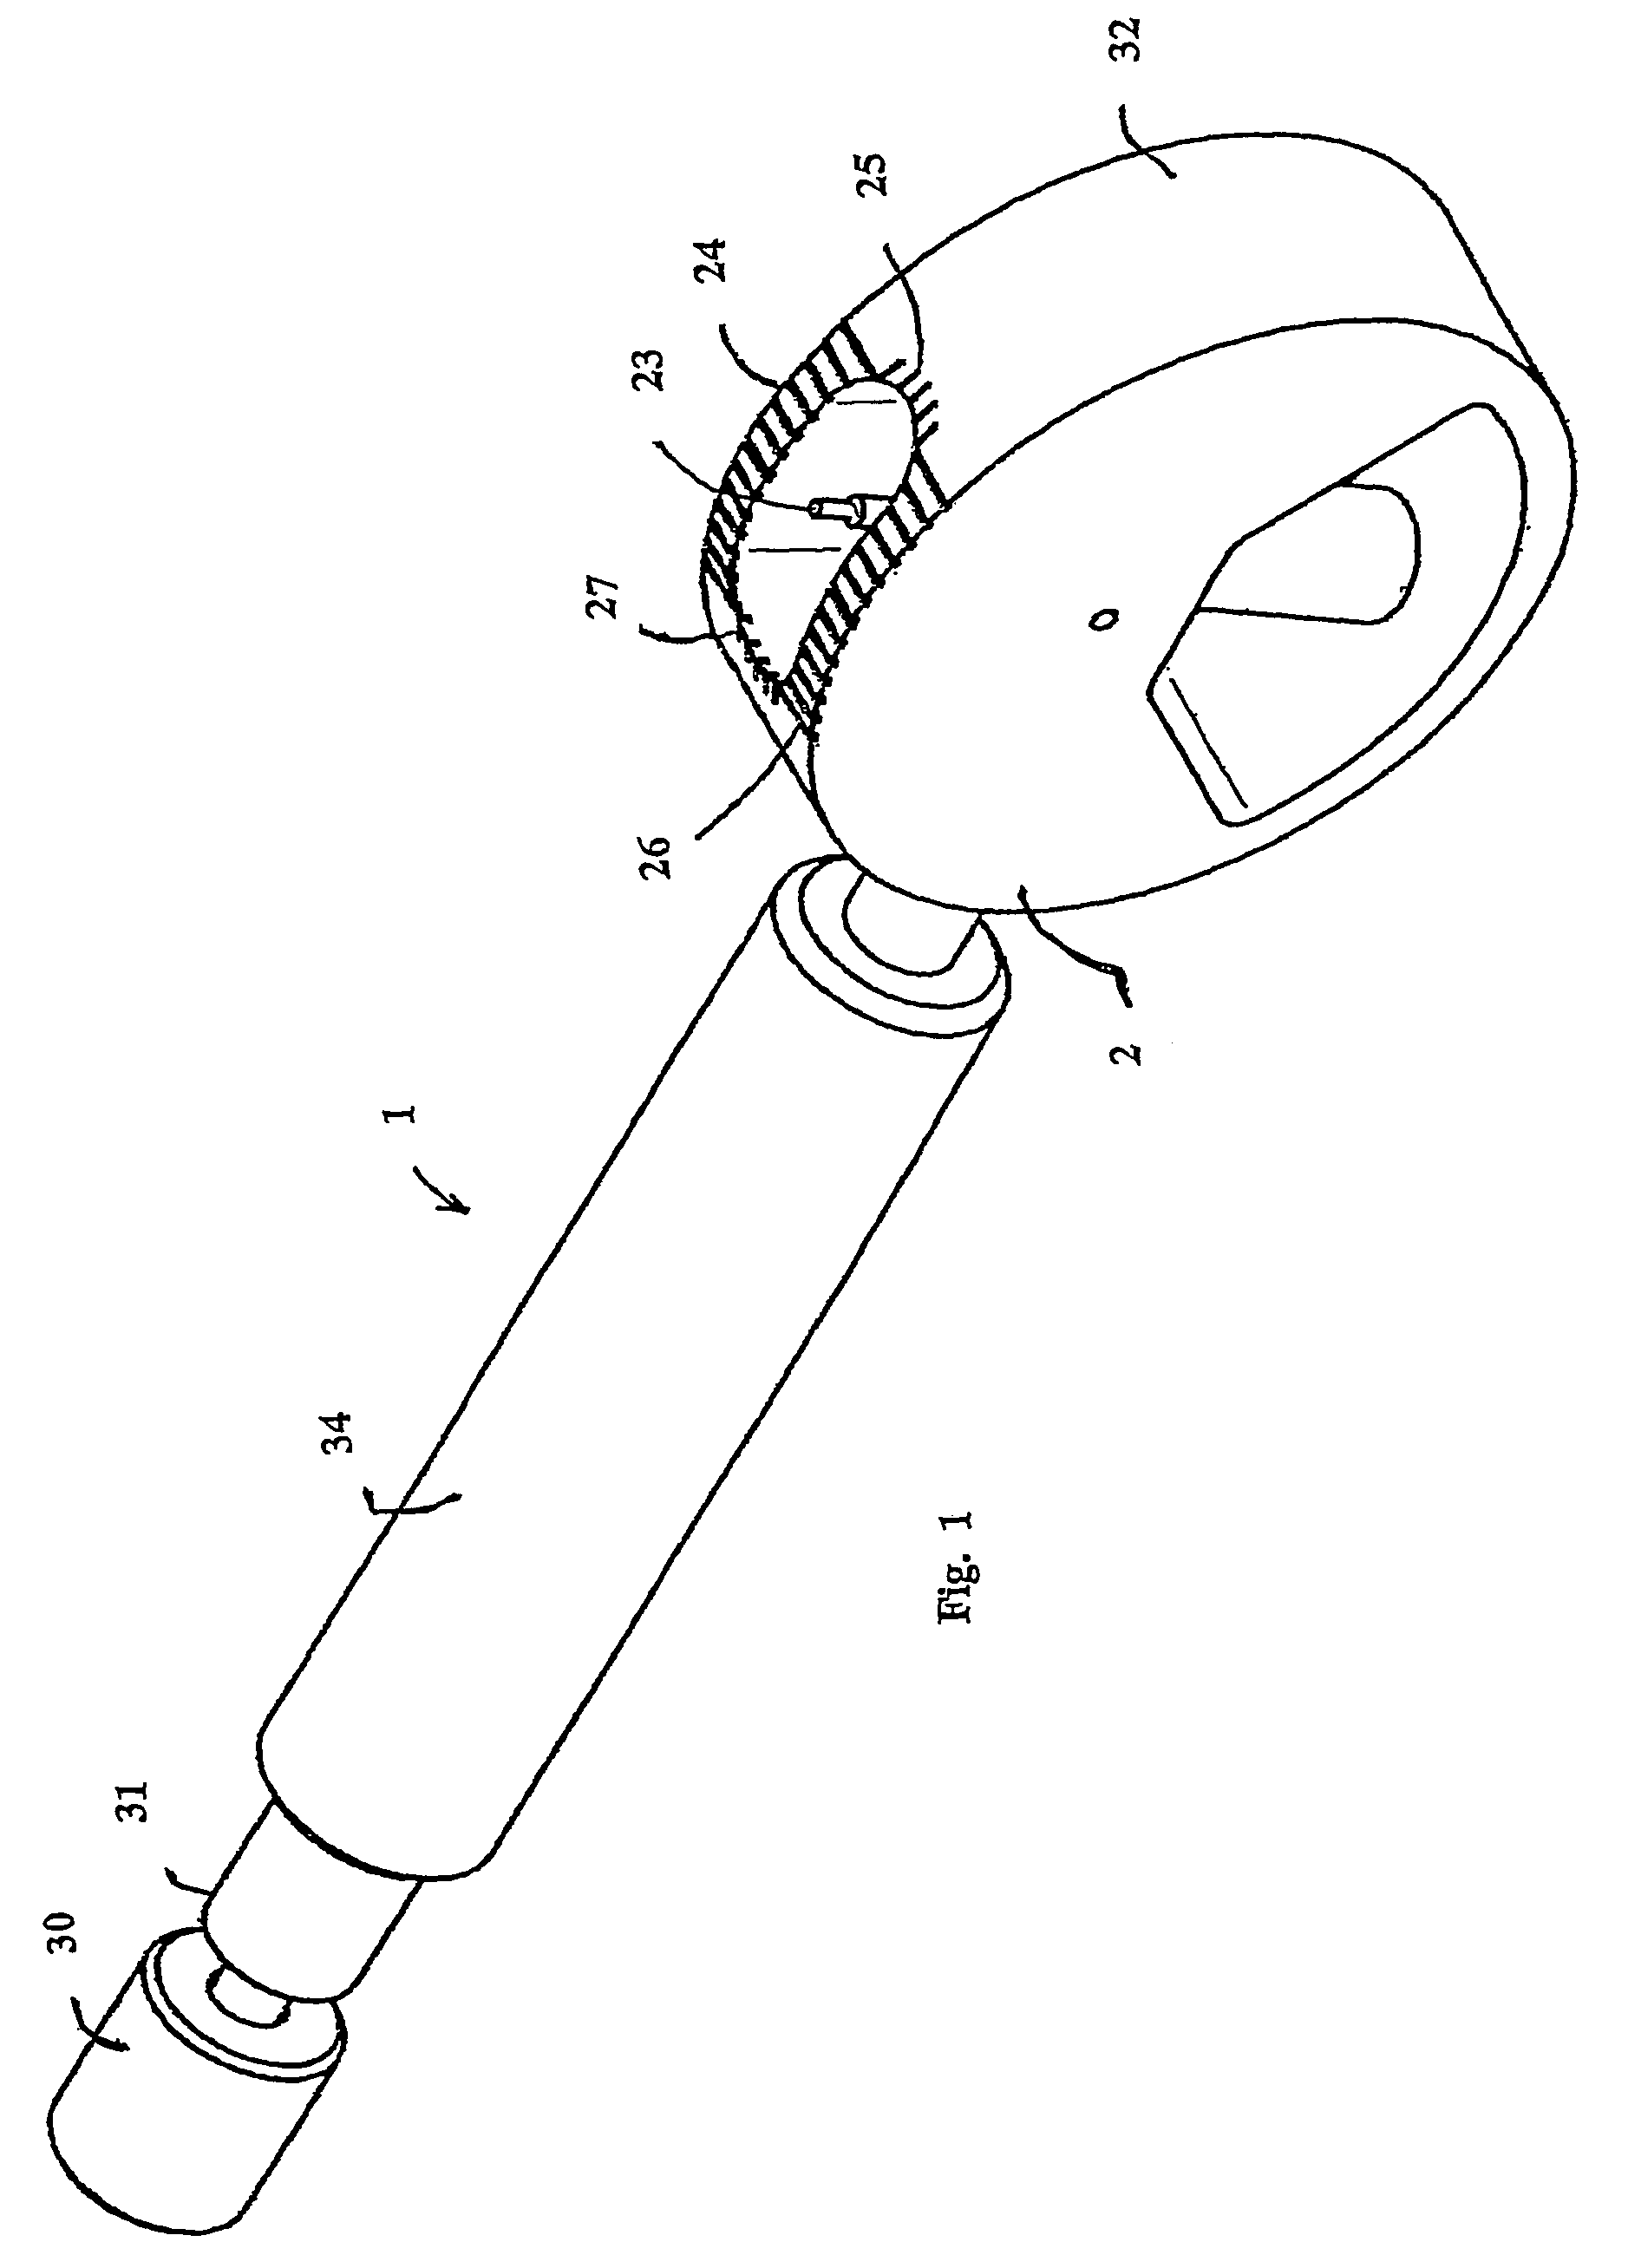 Gauge for use in a surgical procedure